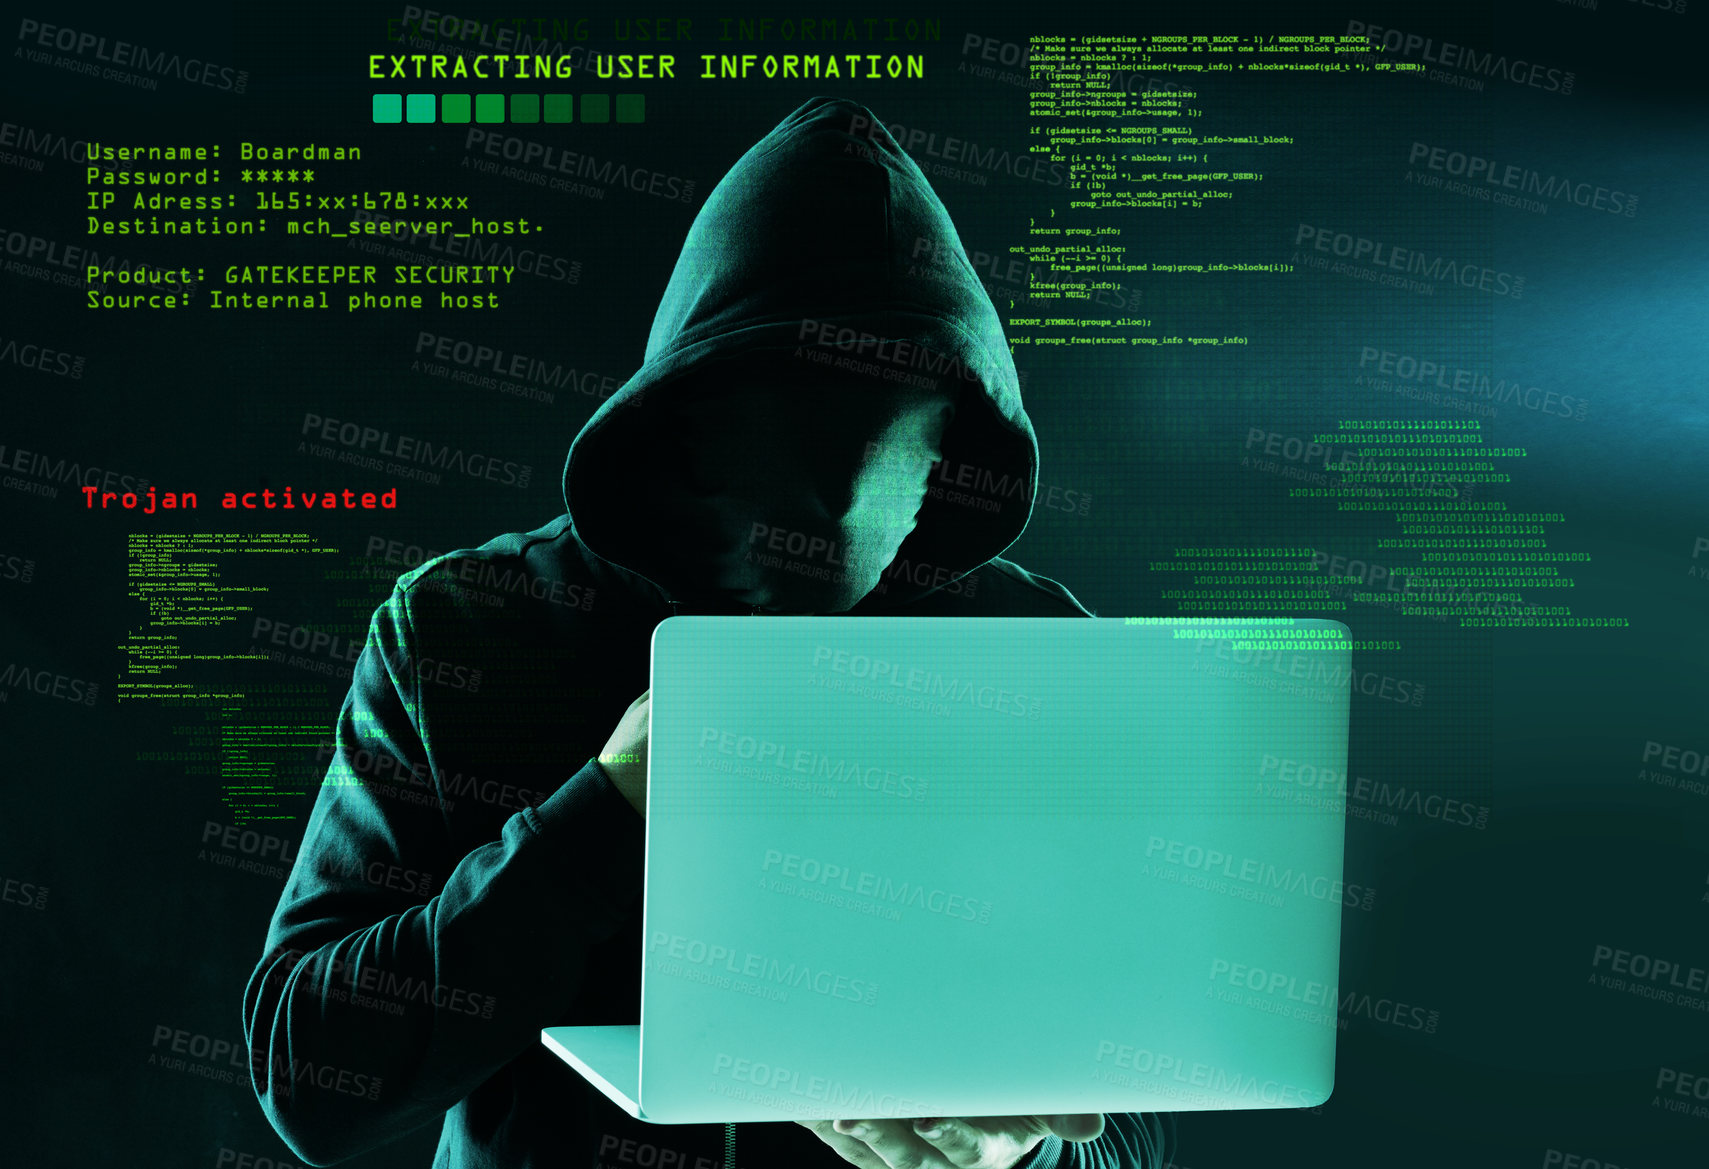 Buy stock photo Shot of an unidentifiable computer hacker using a laptop against a dark background